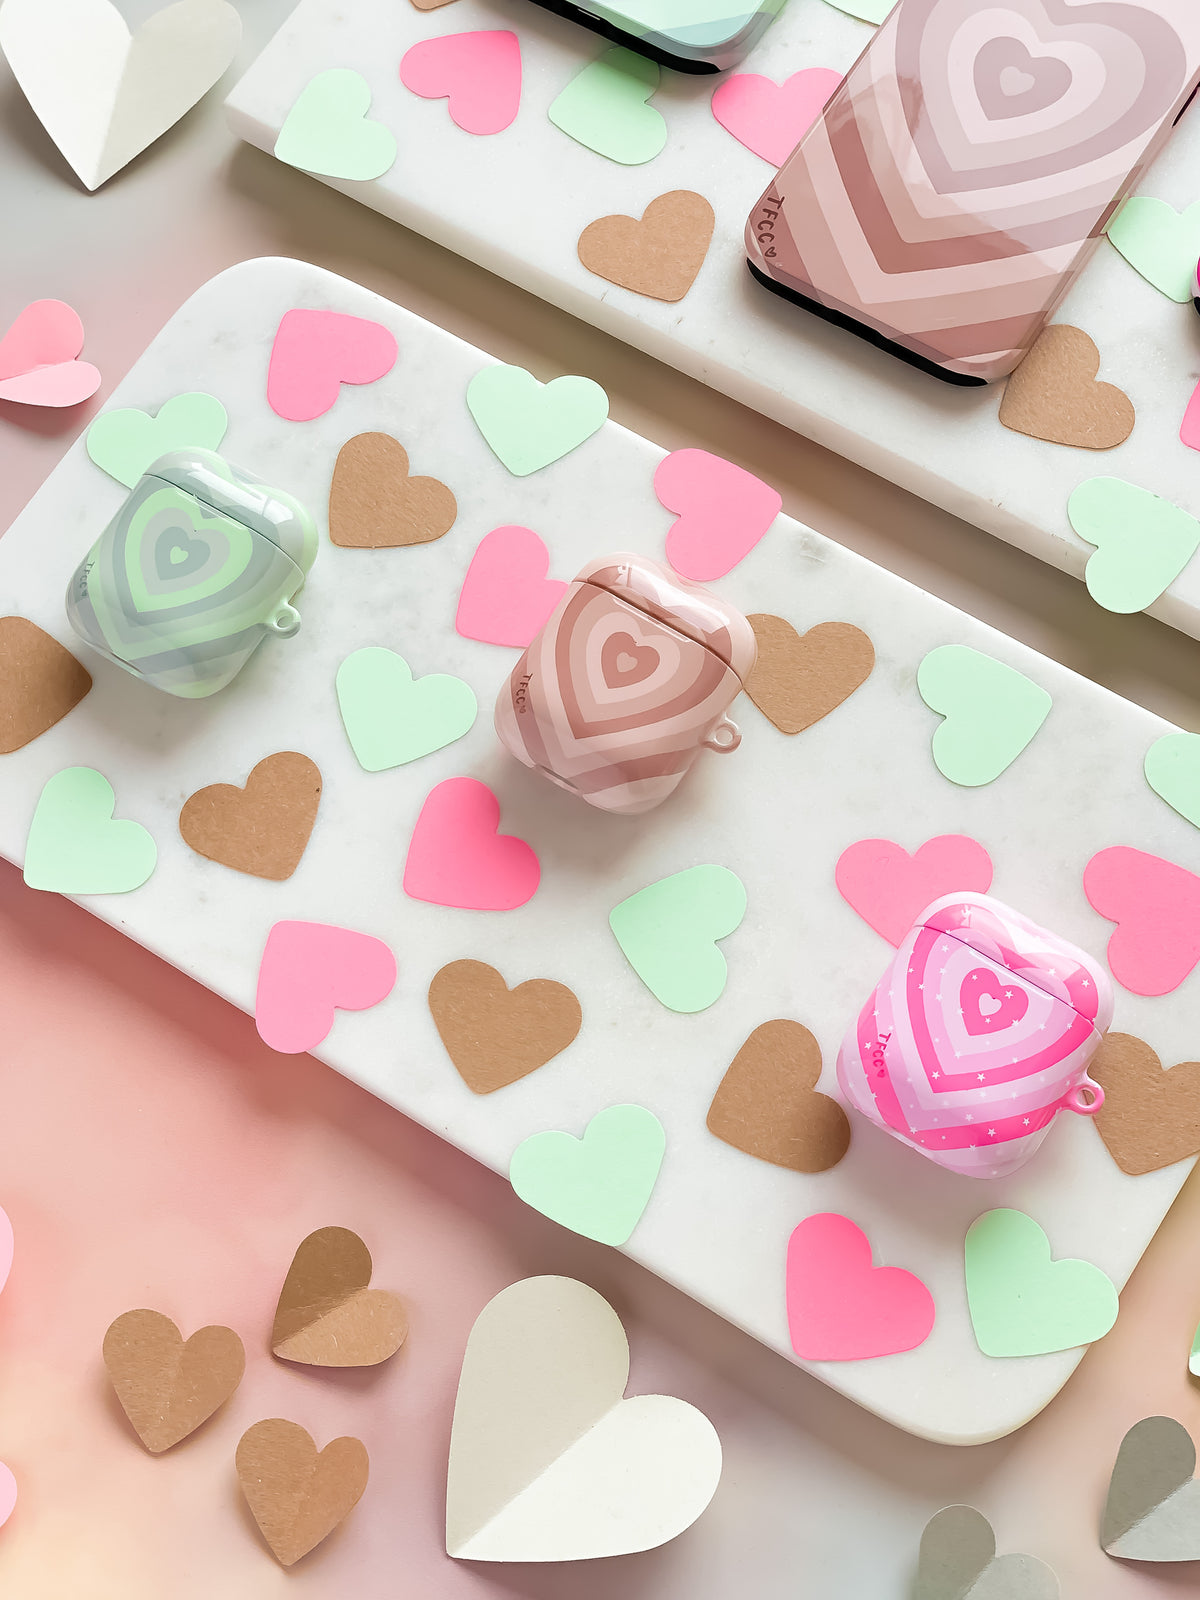 Pink Heart AirPods Case - thefonecasecompany